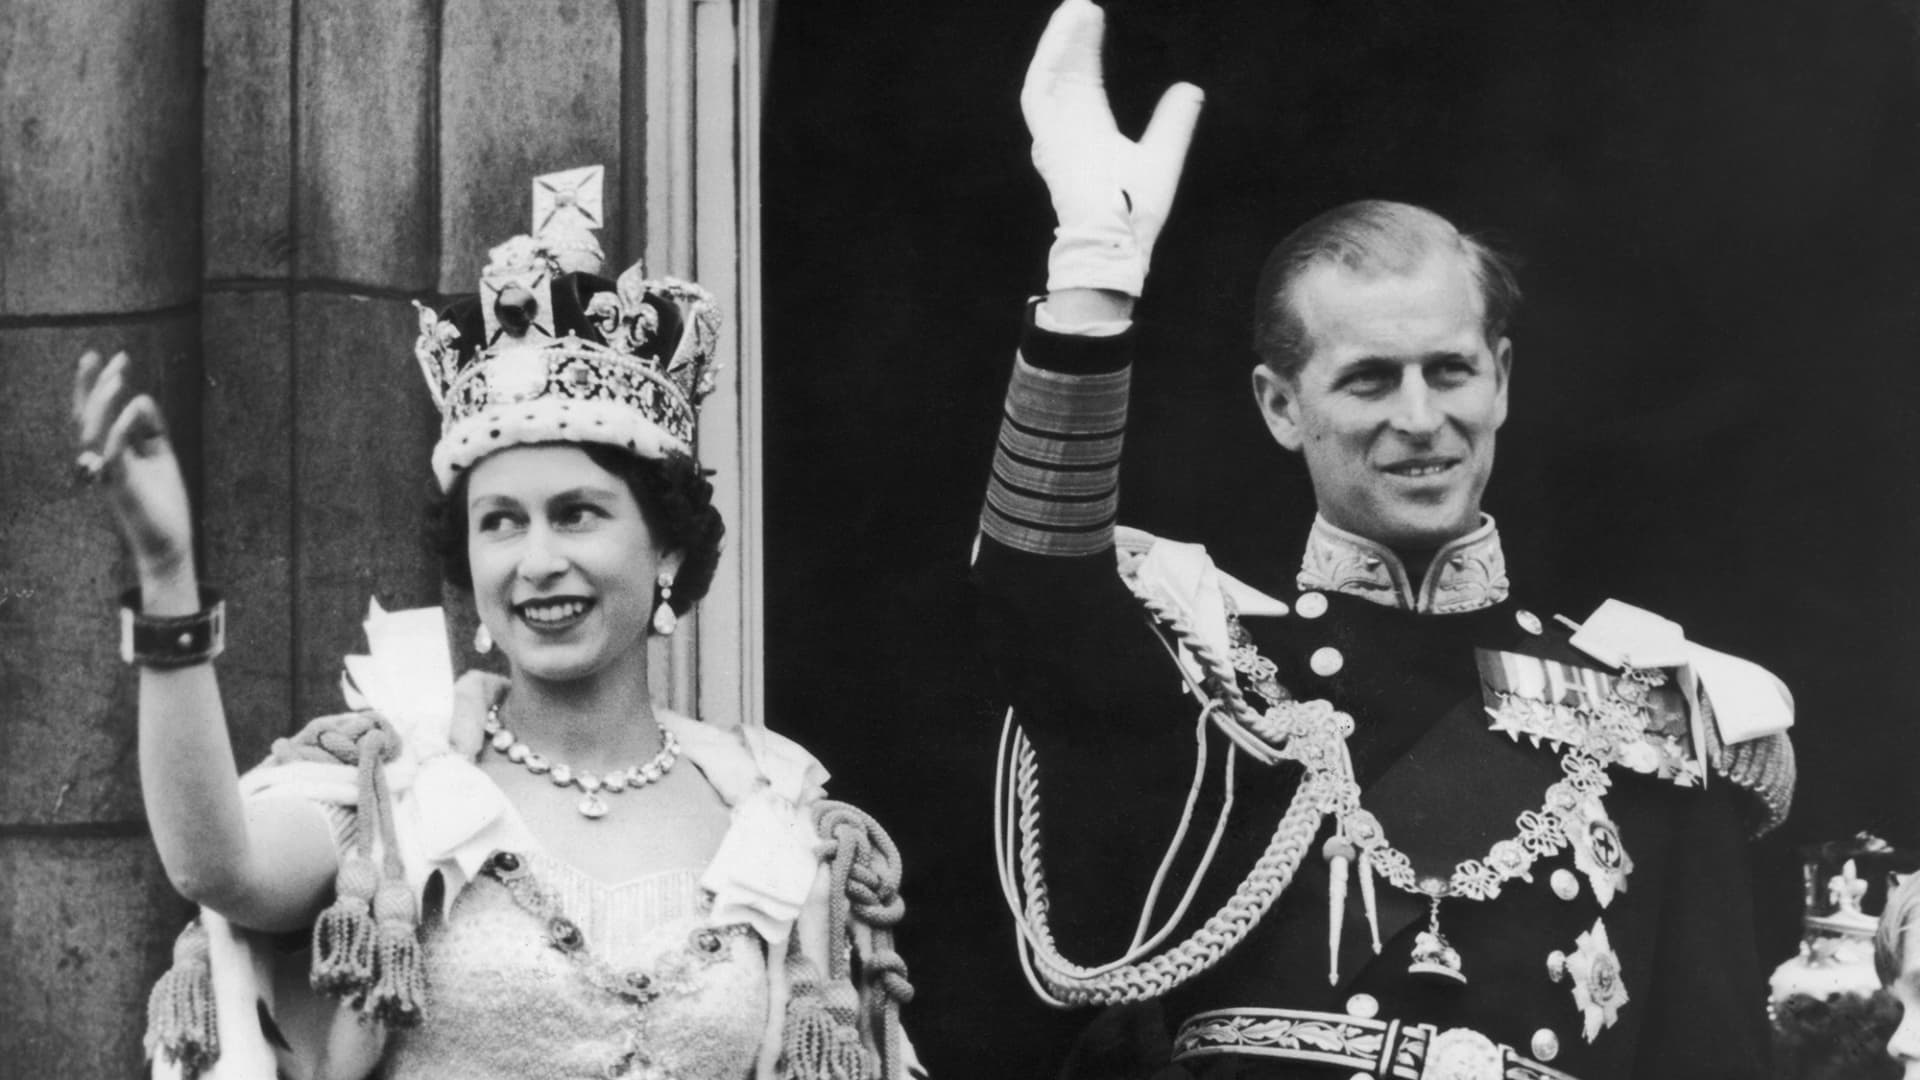 Queen Elizabeth II and the Duke of Edinburgh wave from the balcony at Buckingham Palace during the queen's coronation celebrations June 2, 1953.